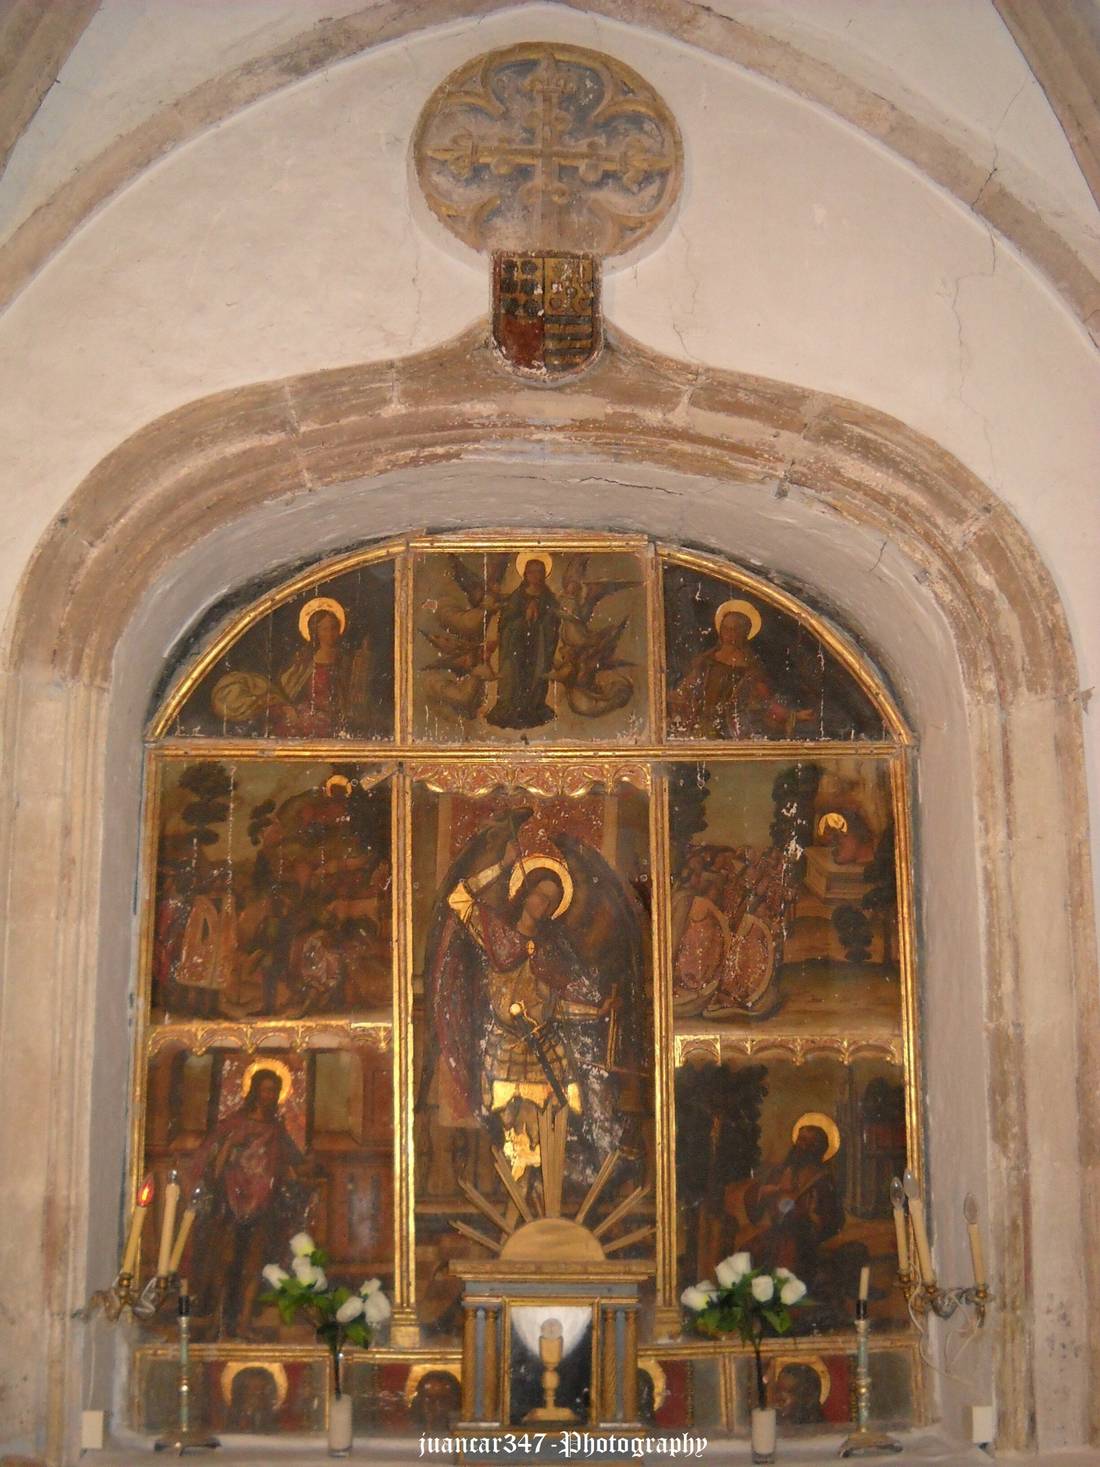 Altarpiece from the 15th century, belonging to the Spanish School or the Burgos School